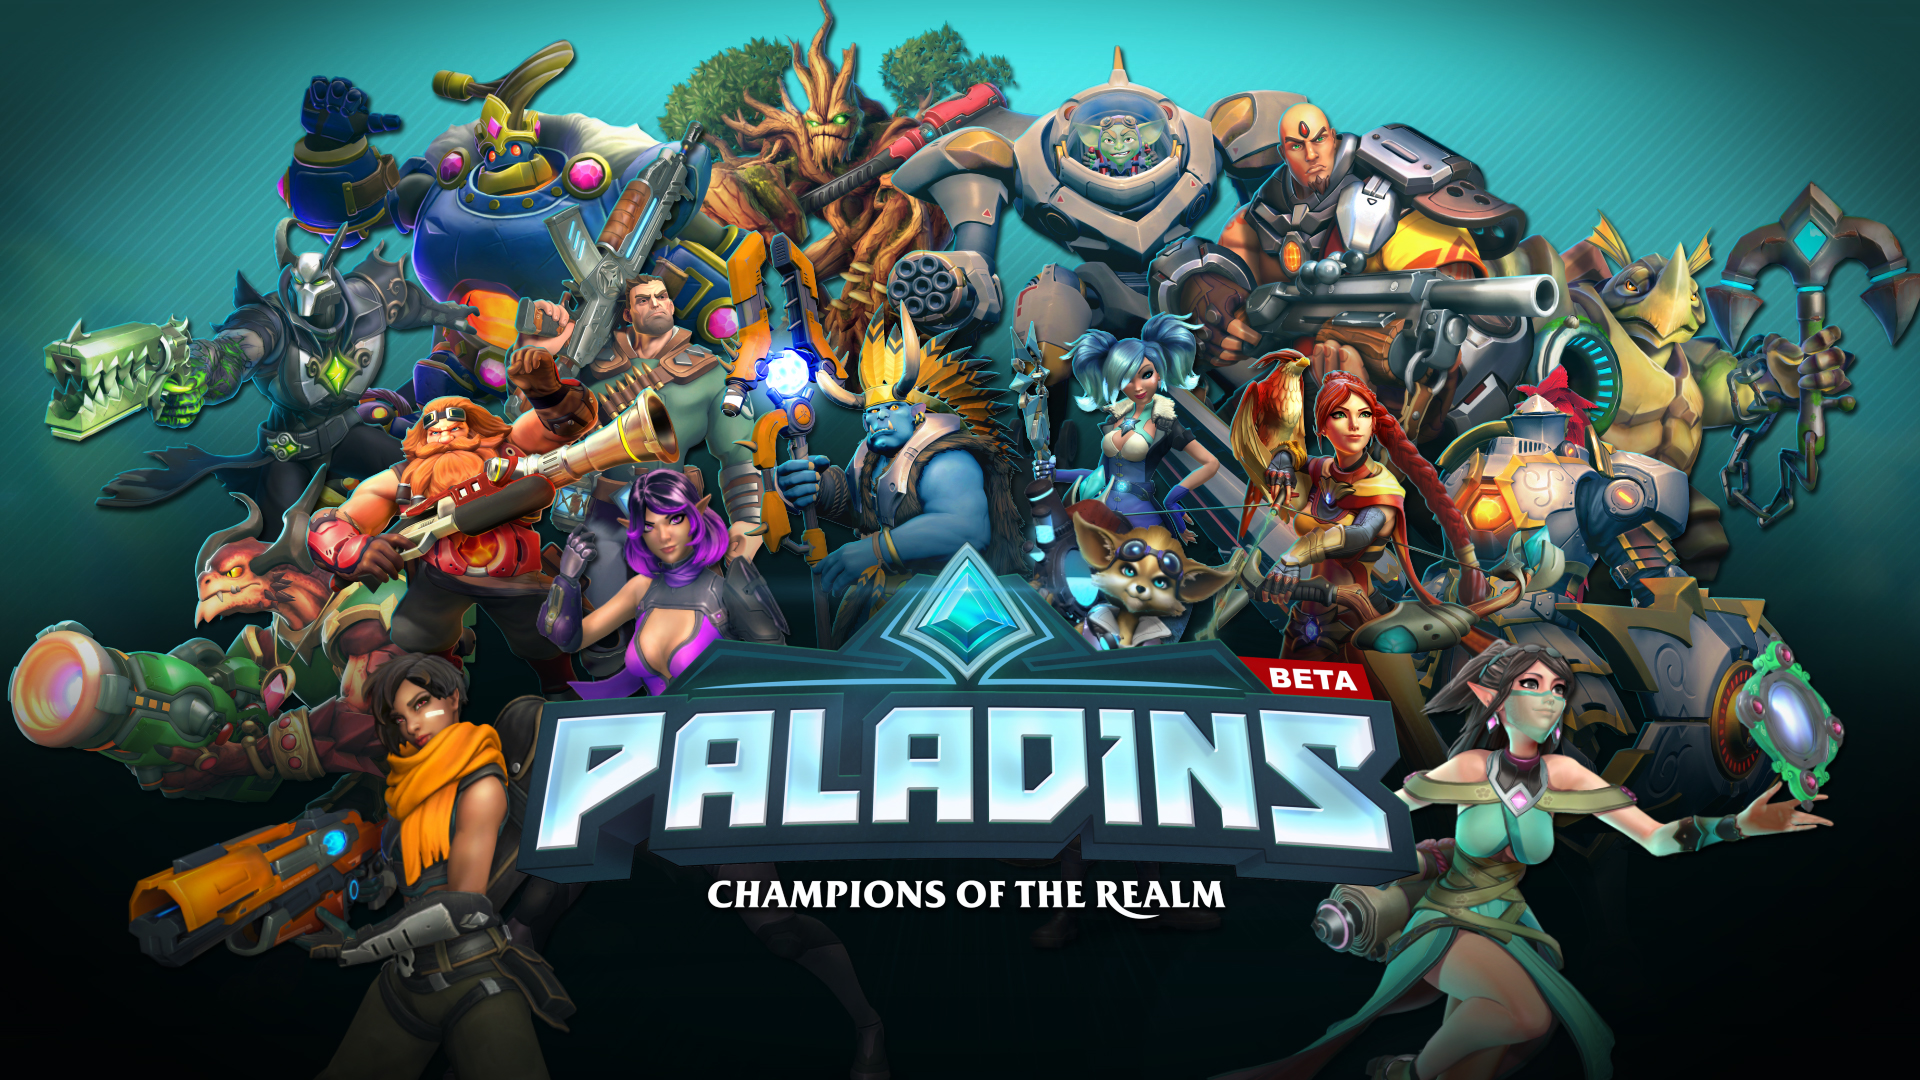 Paladins Champions Of The Realm To Get CrossPlay and CrossProgression